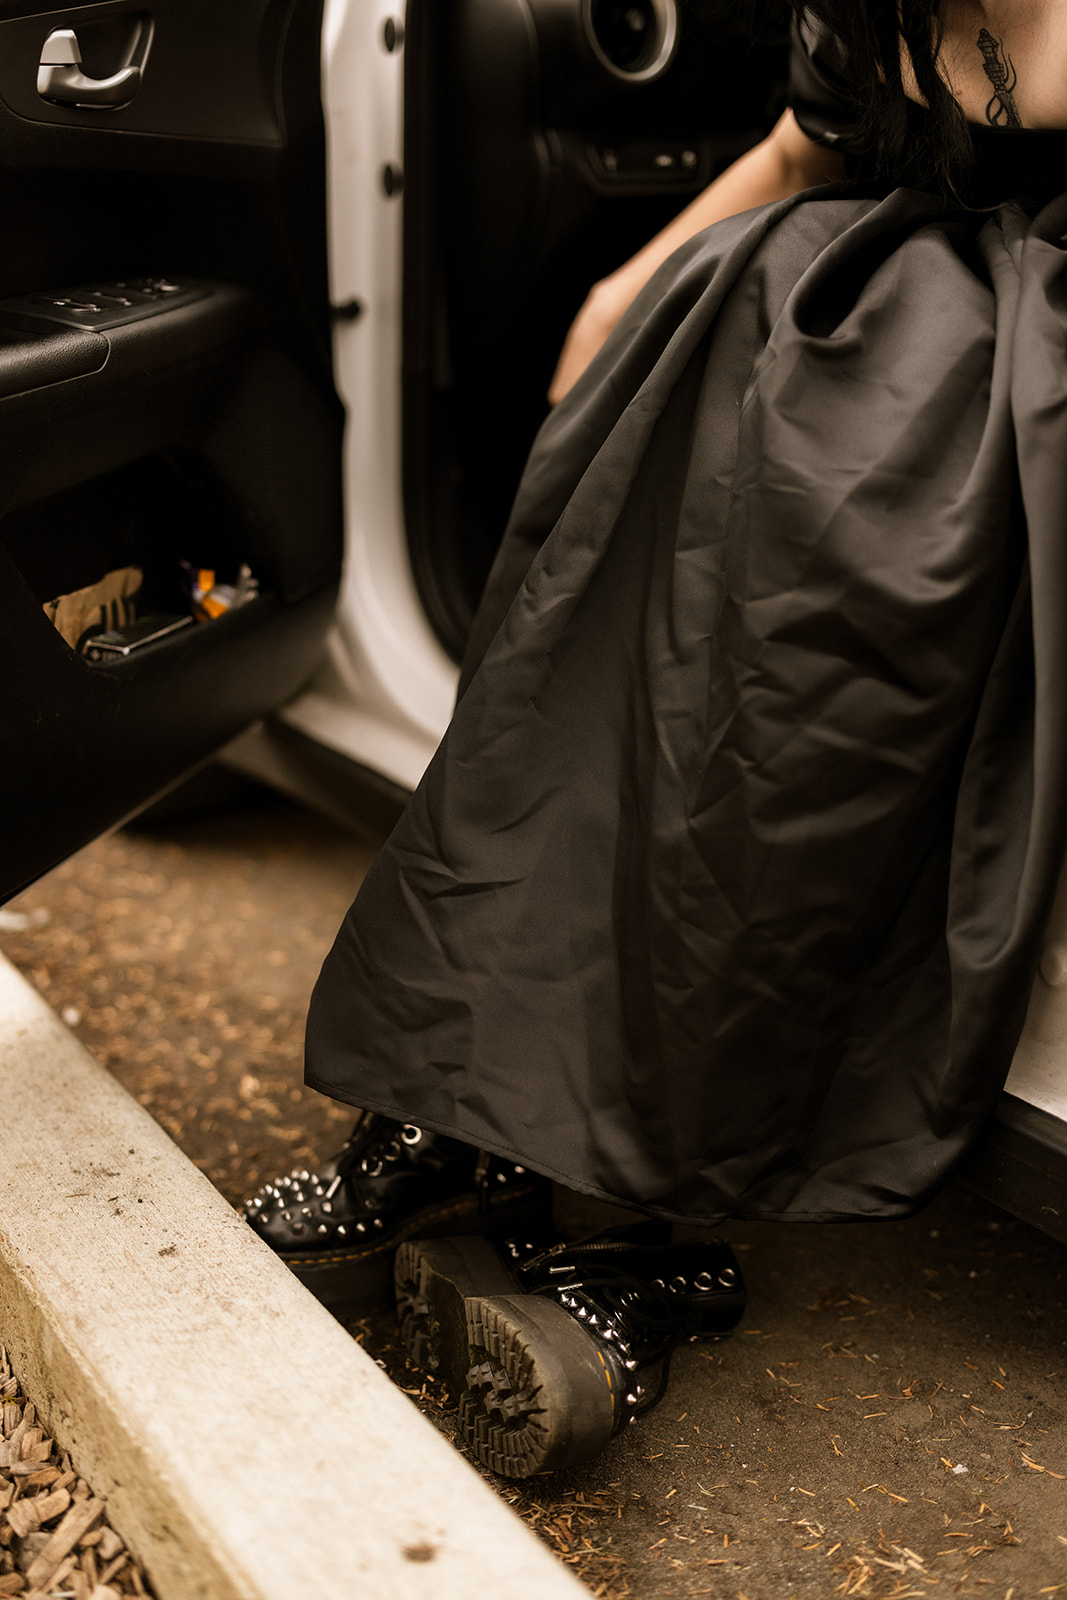 A person in a black wedding dress puts on their studded boots, getting ready for their elopement.